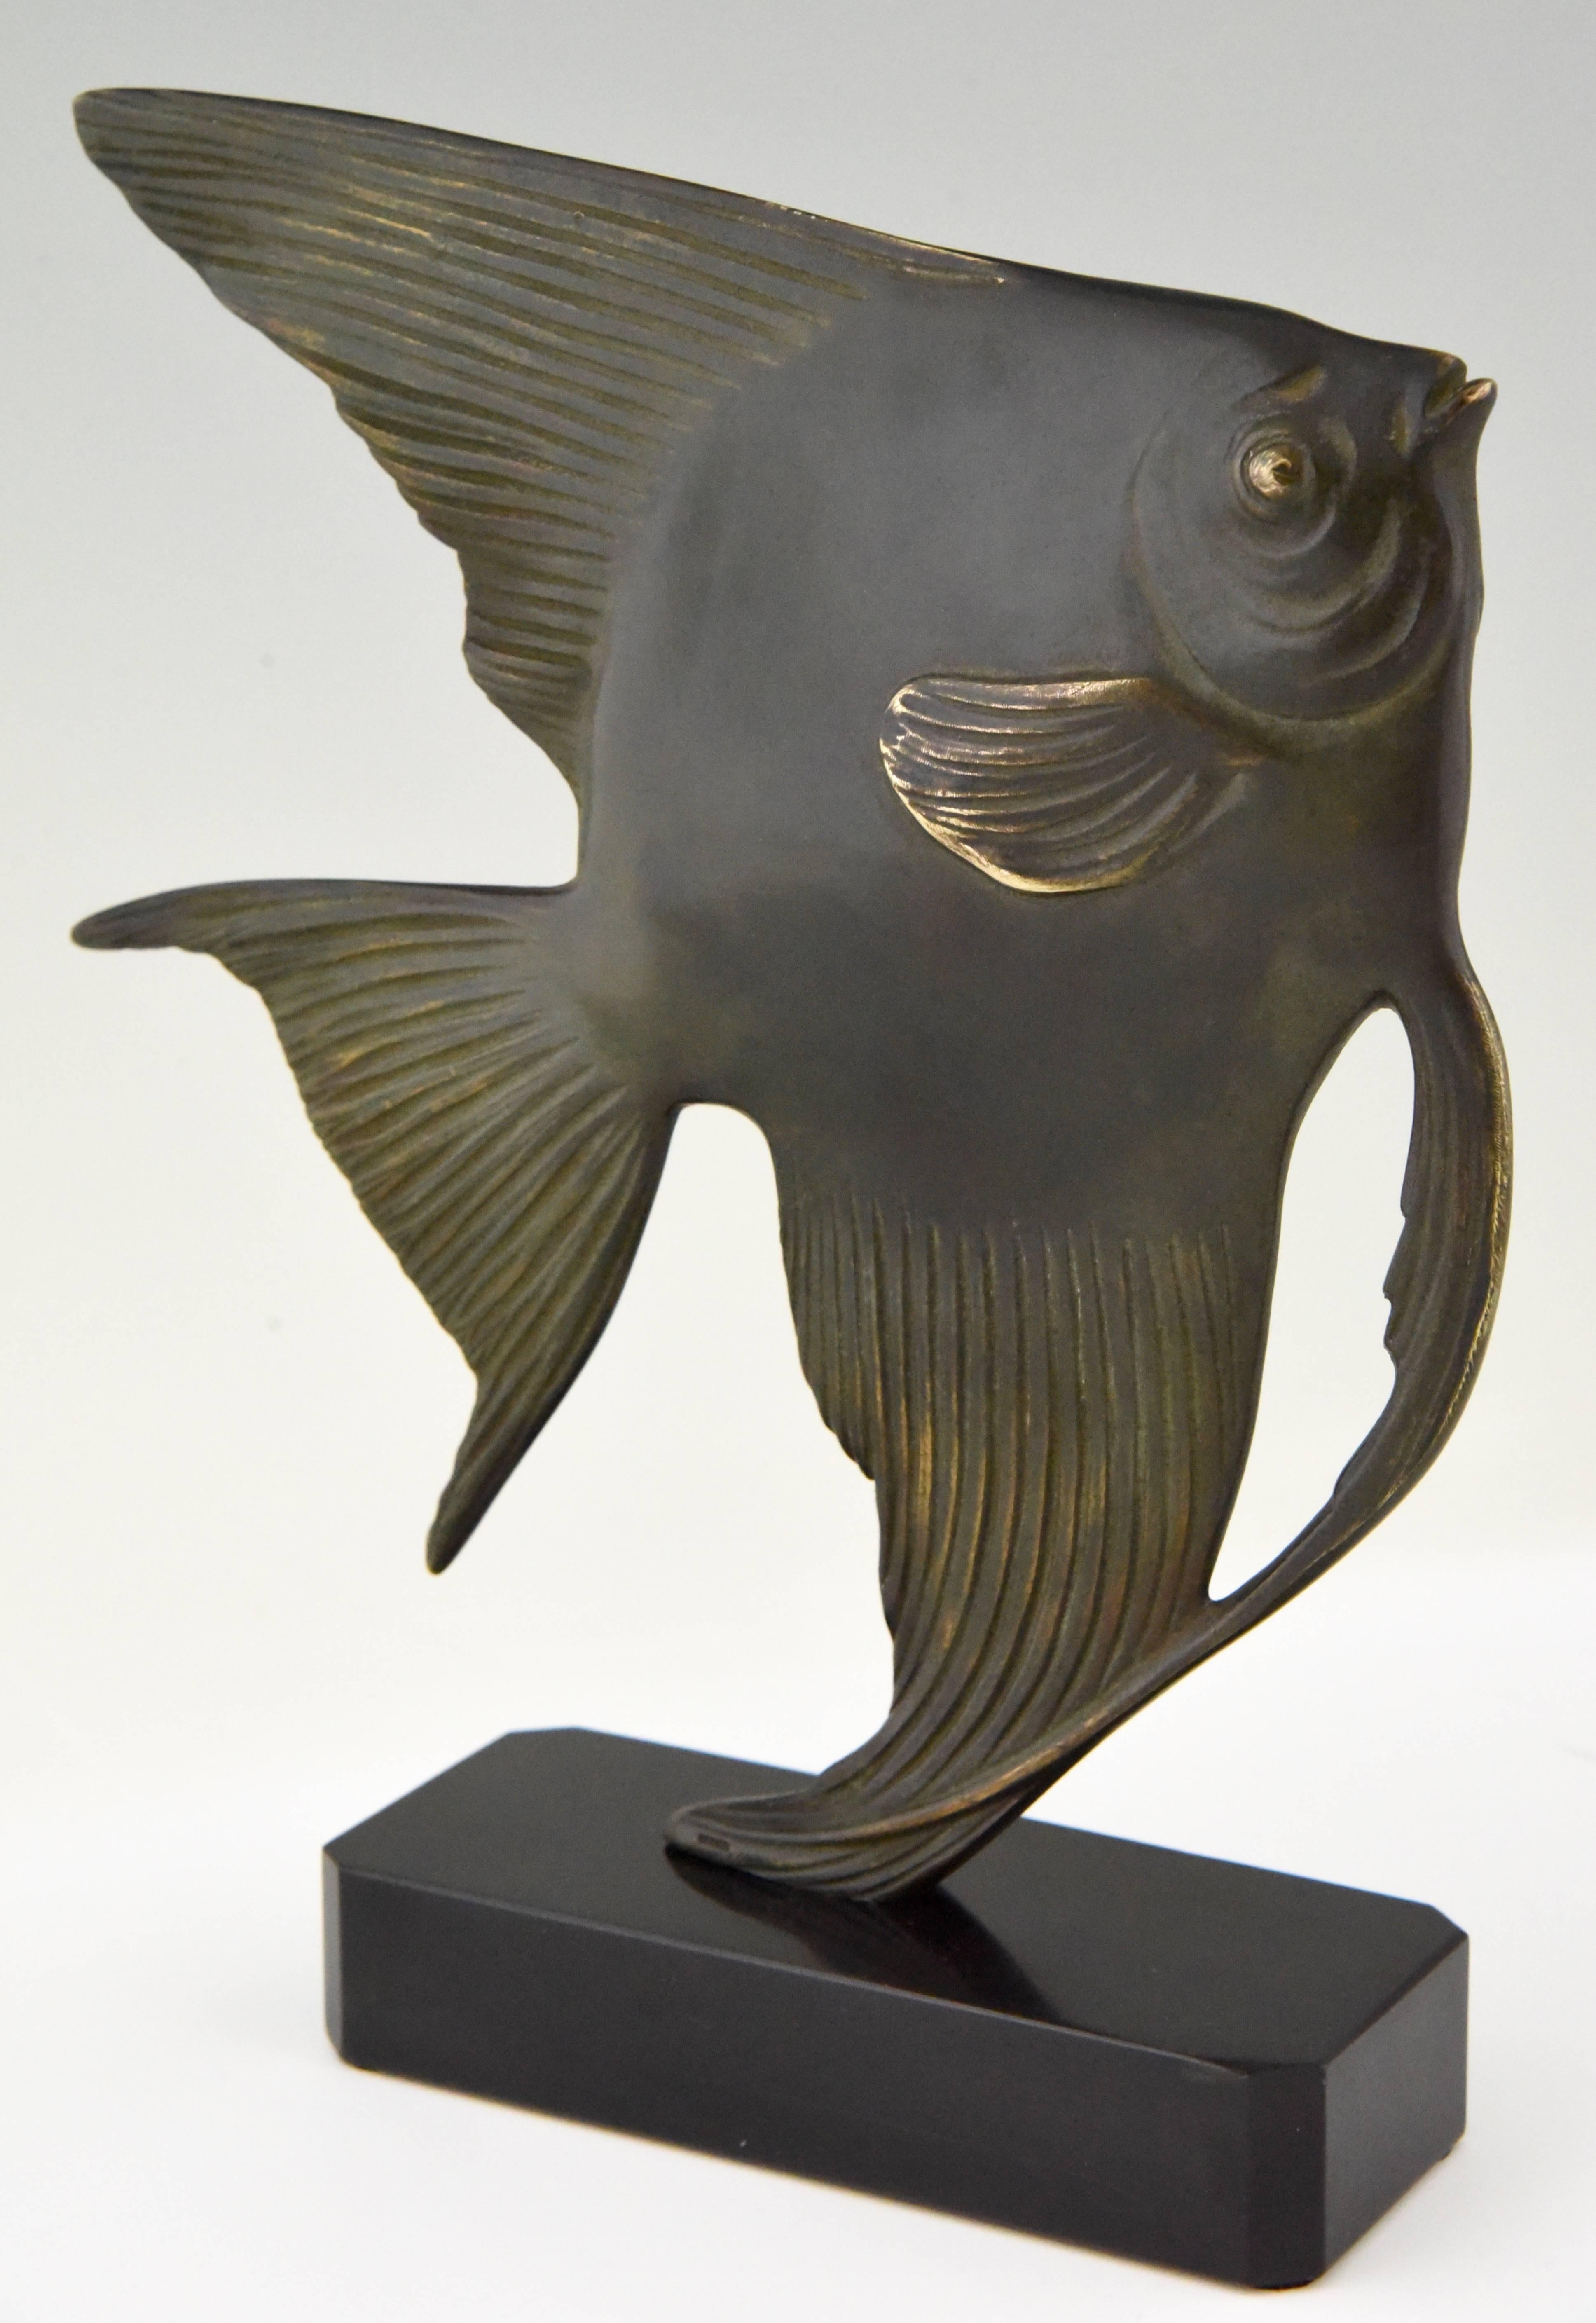 French Art Deco Bronze Sculpture of a Fish by Luc on Marble Base, France 1930